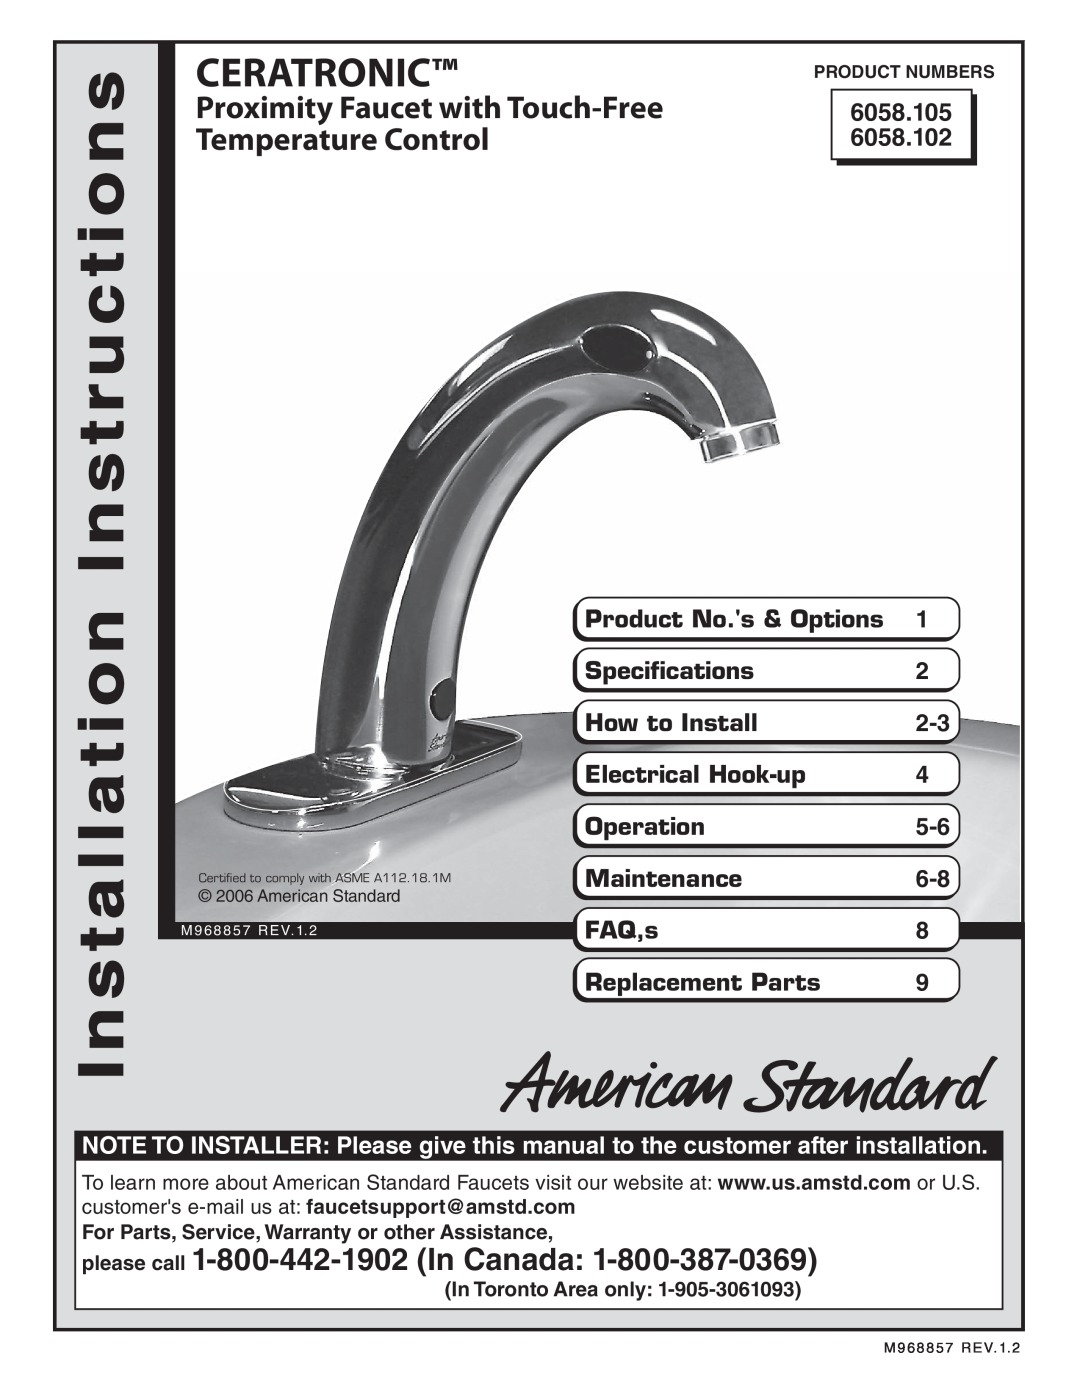 American Standard 6058.102 installation instructions Proximity Faucet with Touch-Free, Temperature Control, 6058.105 